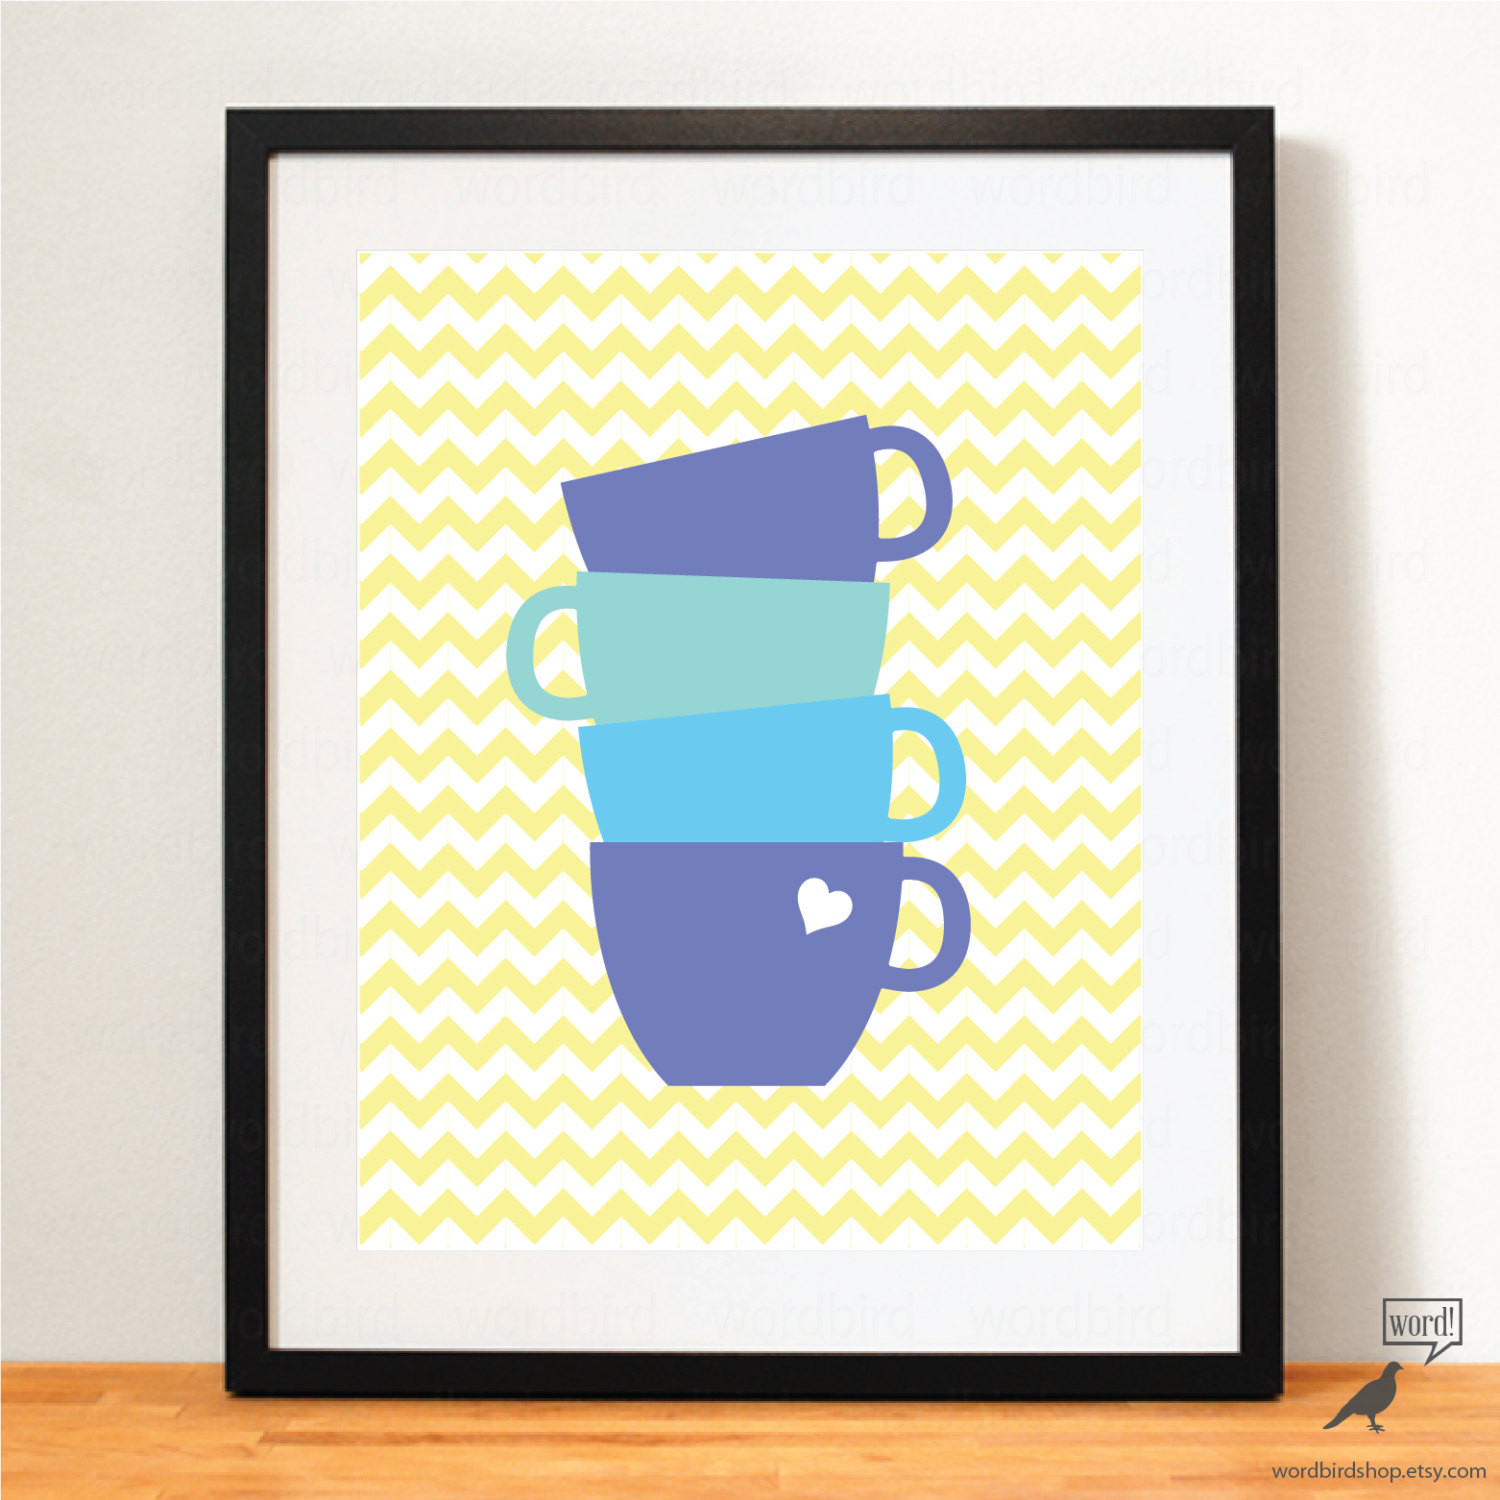 Blue Kitchen Wall Decor
 Blue & Yellow Kitchen Wall Art Coffee Poster Teal by